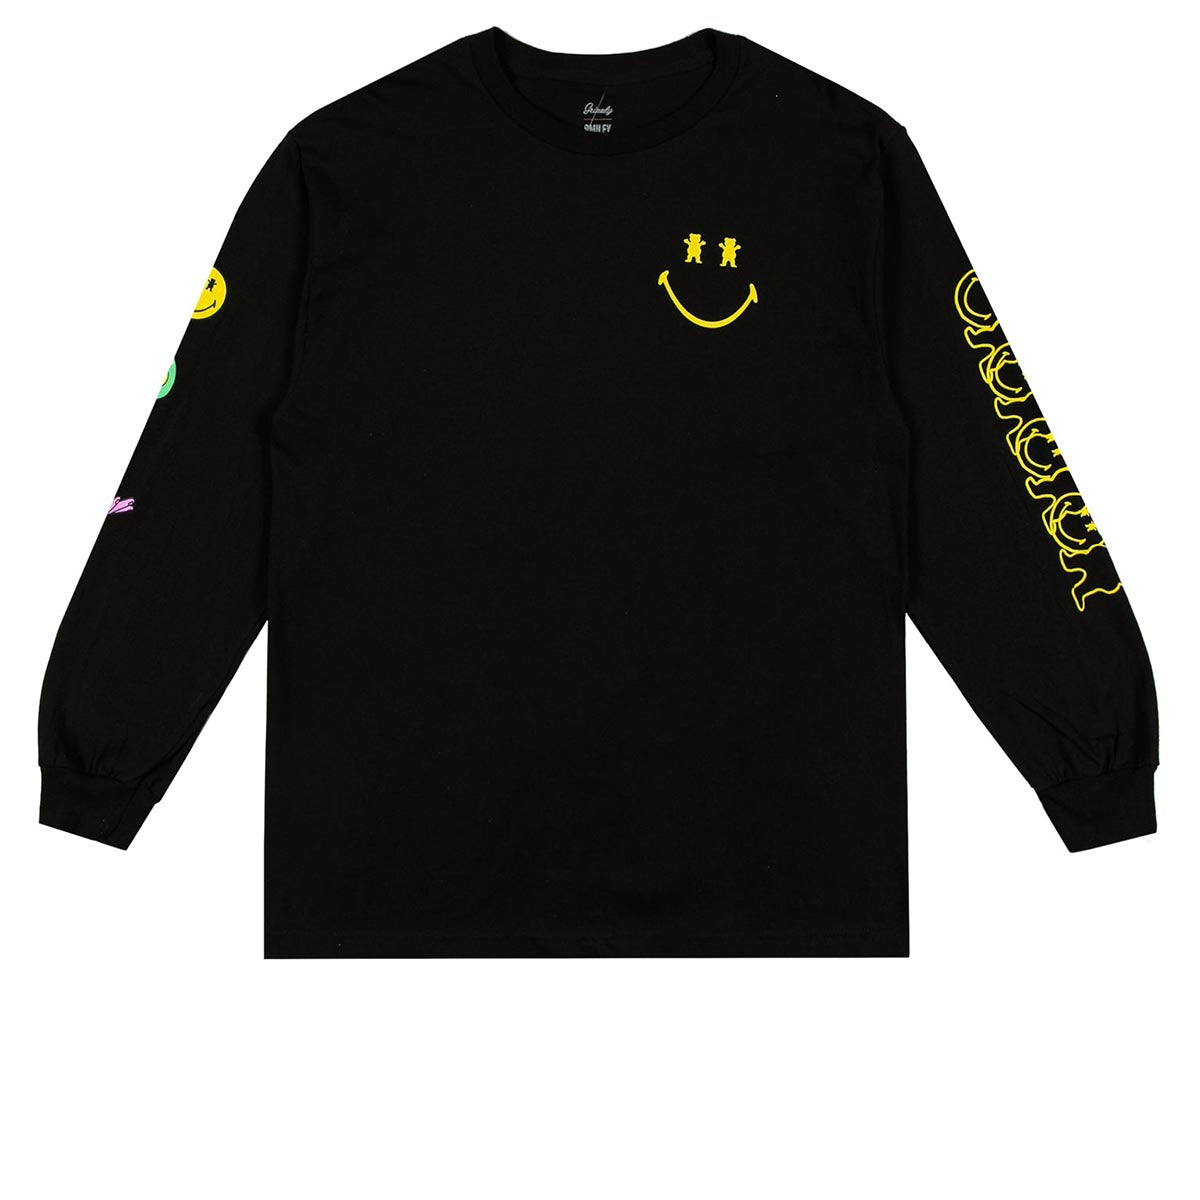 Grizzly x Smiley World Big Smile Long Sleeve T-Shirt - Black image 1